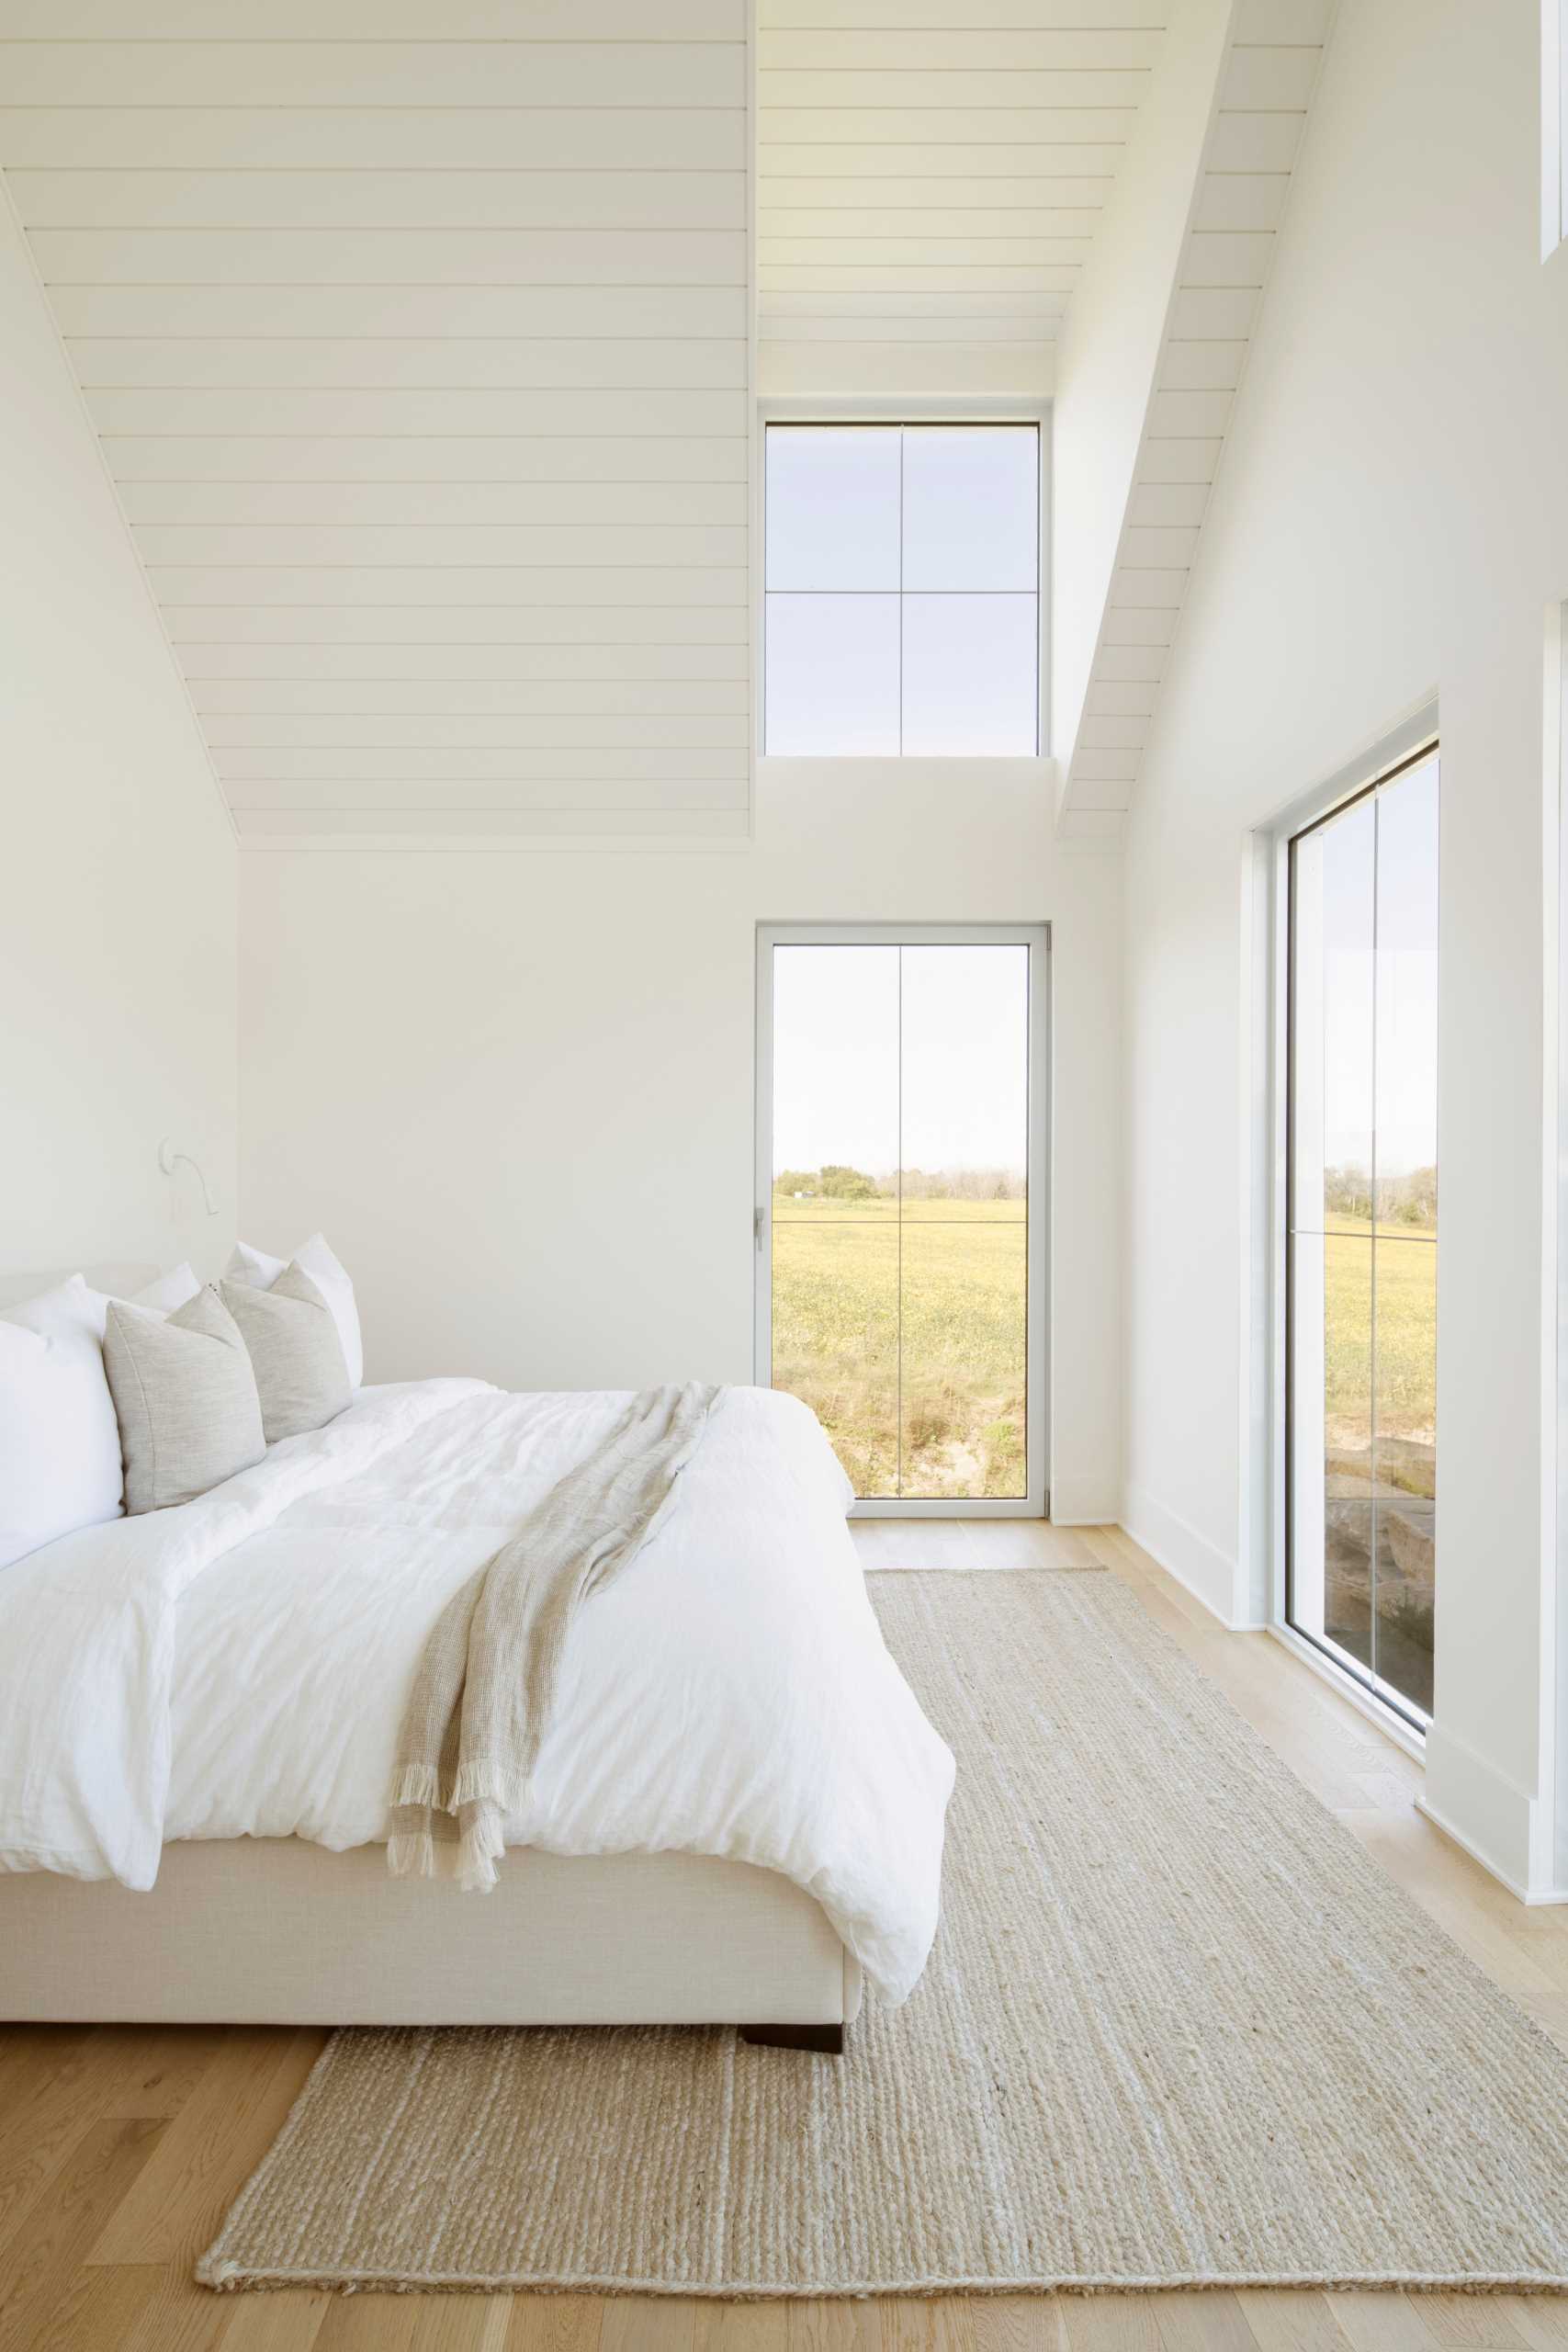 A contemporary bedroom with windows that look out to the landscape.